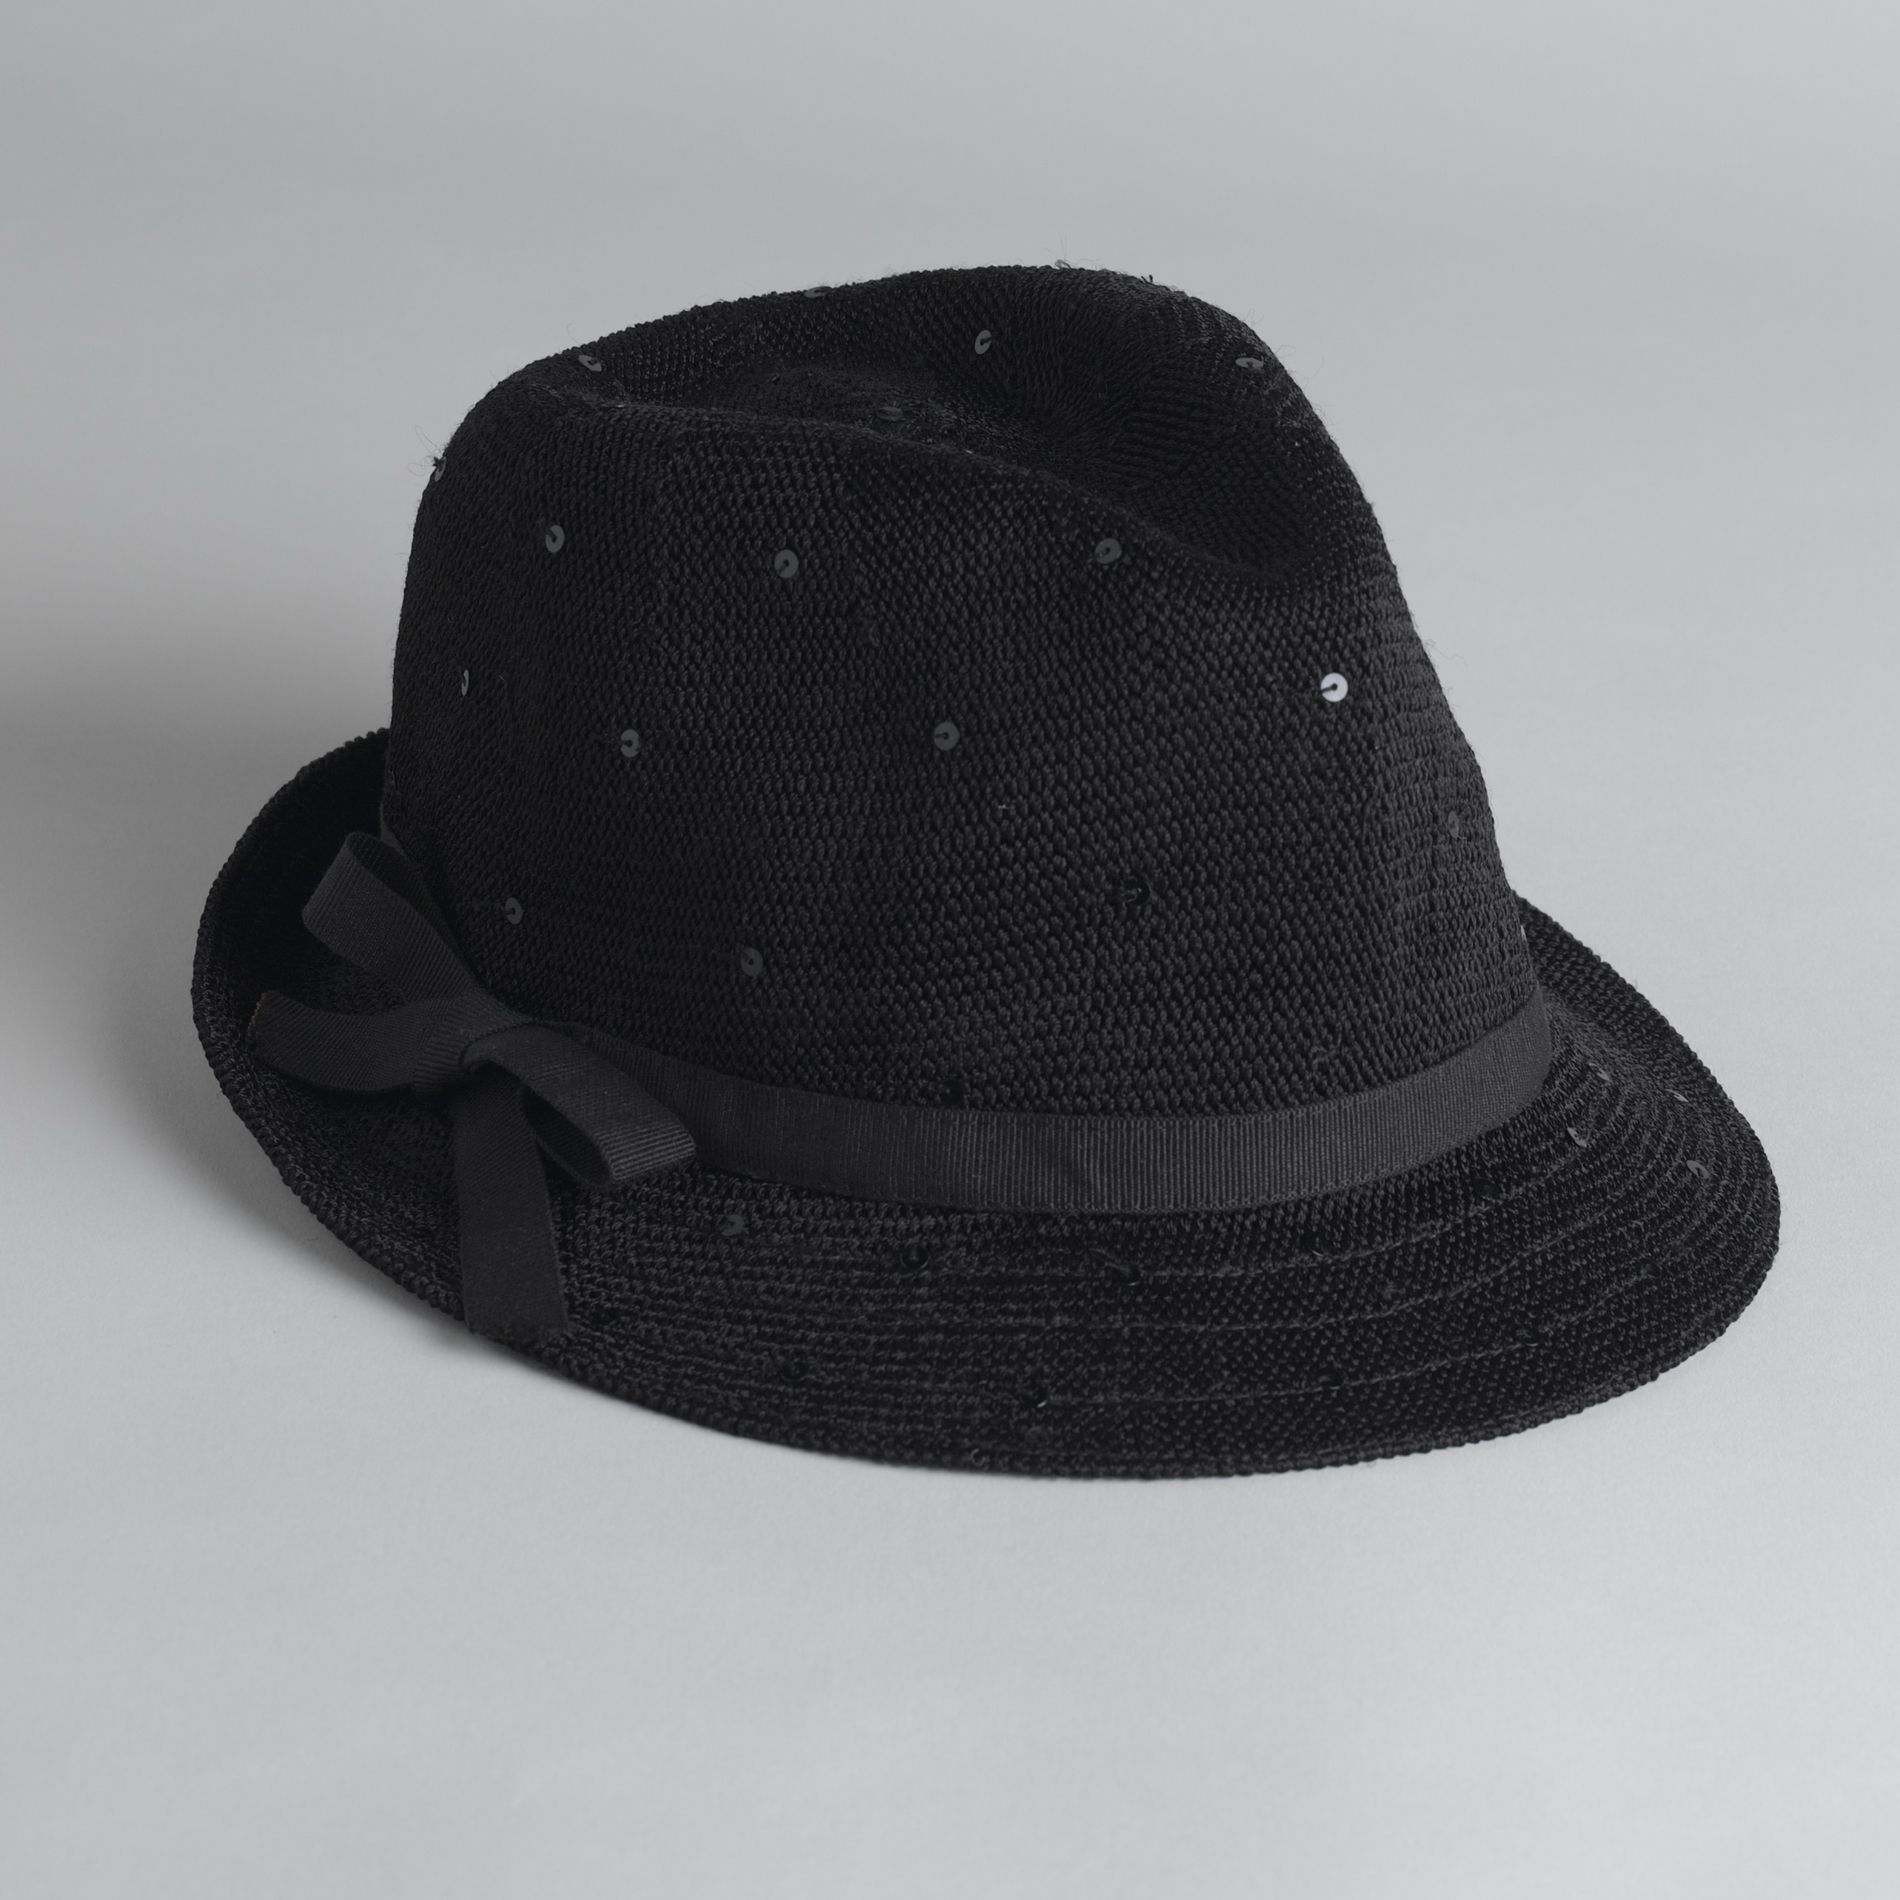 Attention Rayon Knit with Sequins Fedora Hat